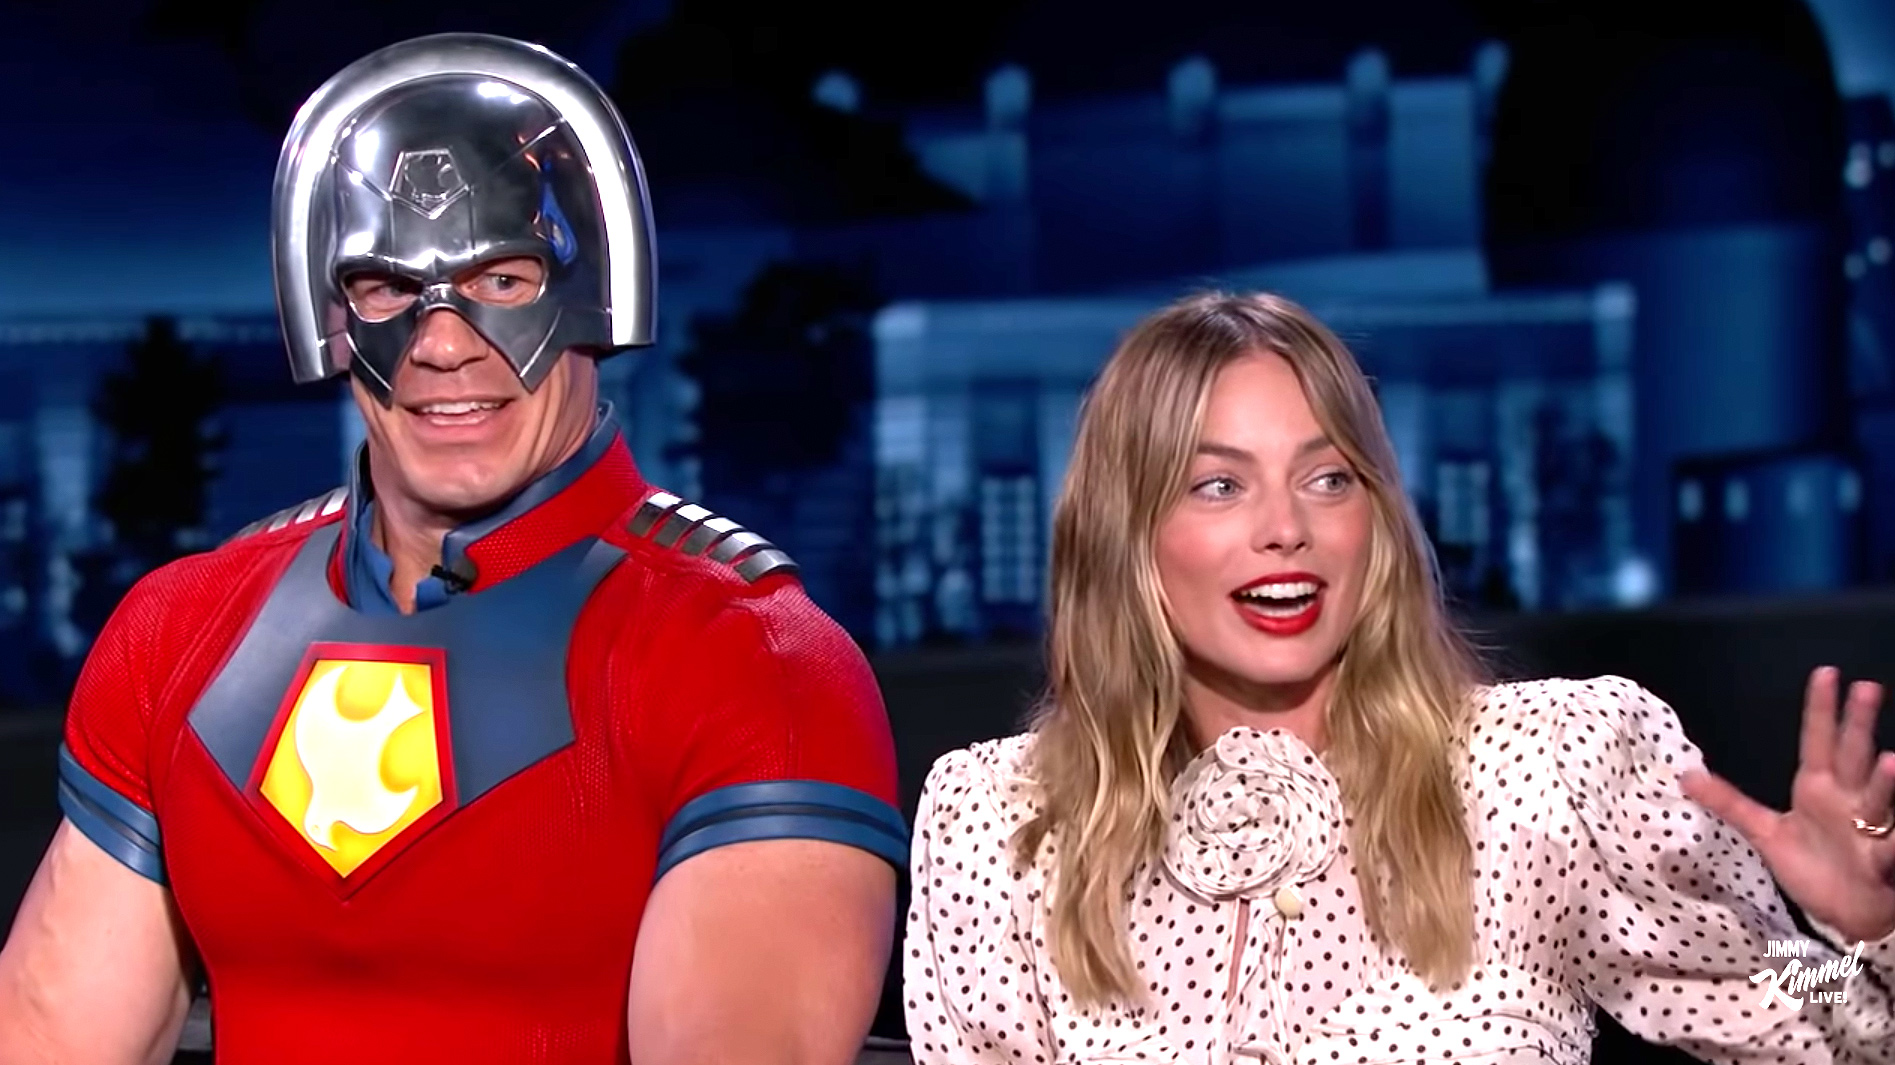 Margot Robbie Once Slept in a Room with a 'Cardboard Cut-Out' of John Cena Before They Met – Hot 106.1 FM